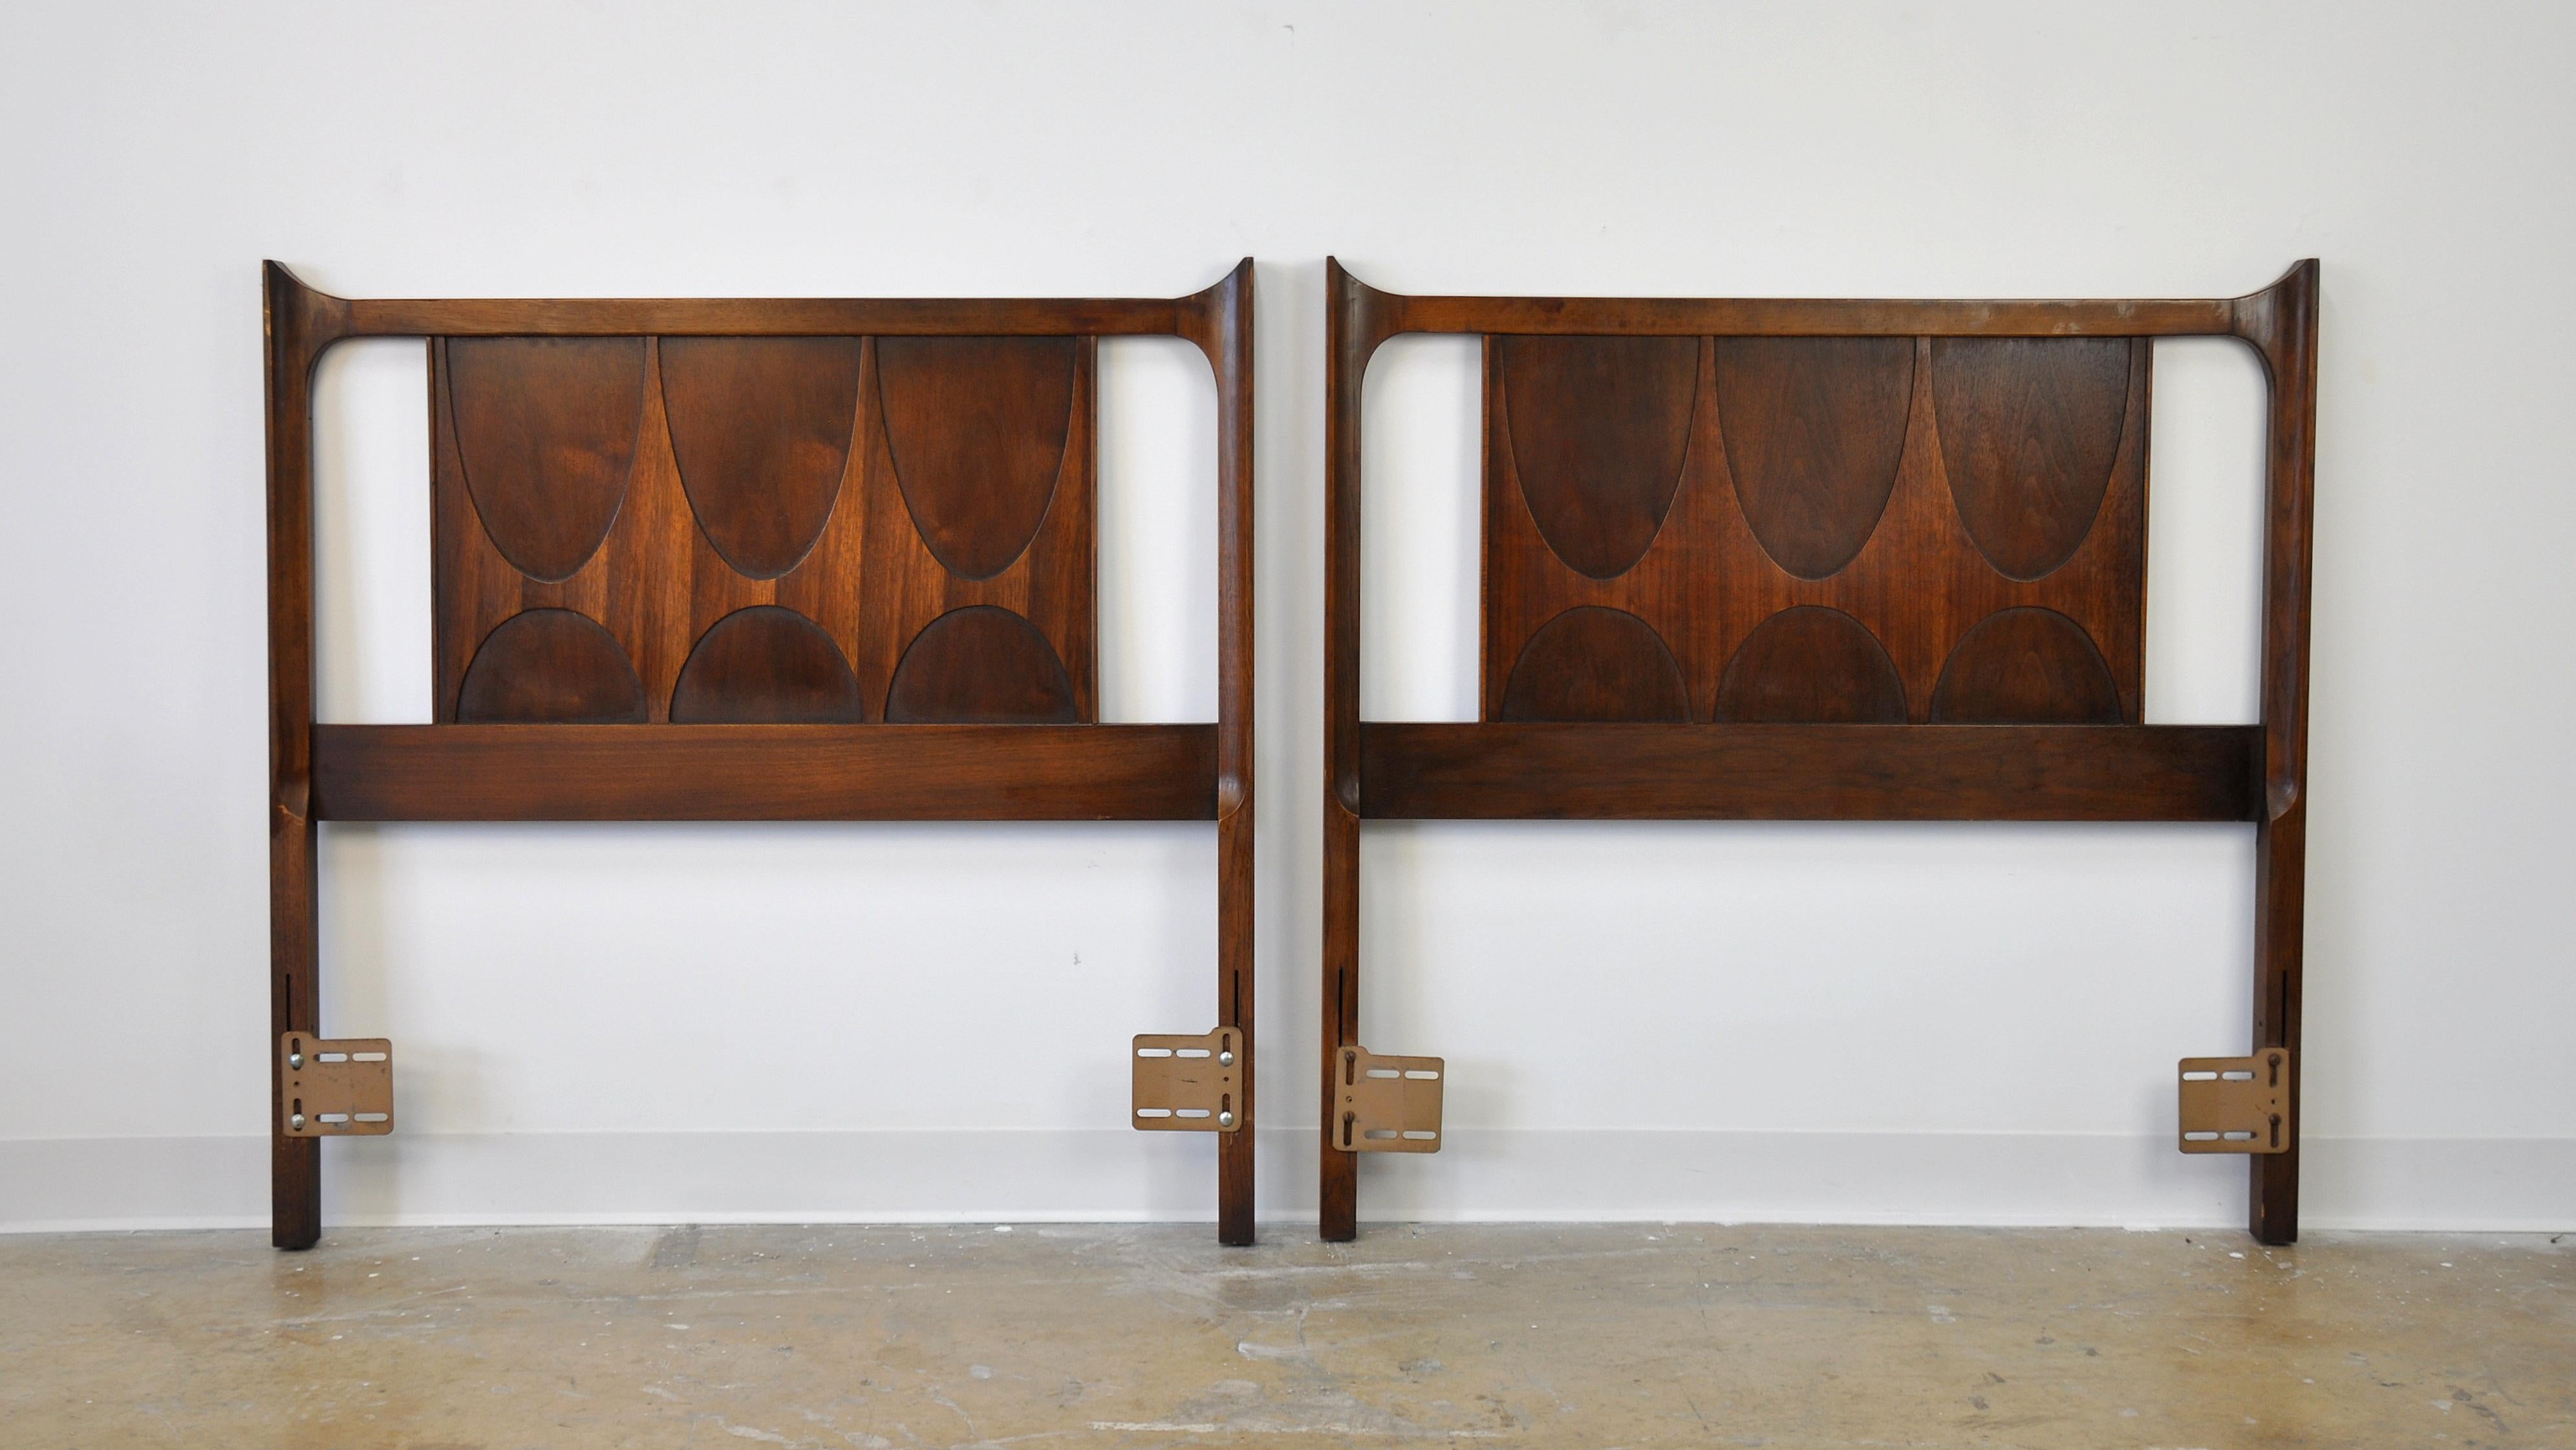 A vintage Mid-Century Modern pair of twin headboards that, if placed together, can be used with a king size bed. Manufactured by Broyhill in the 1960s, each solid walnut frame features the signature relief cut and sculpted pattern modeled after